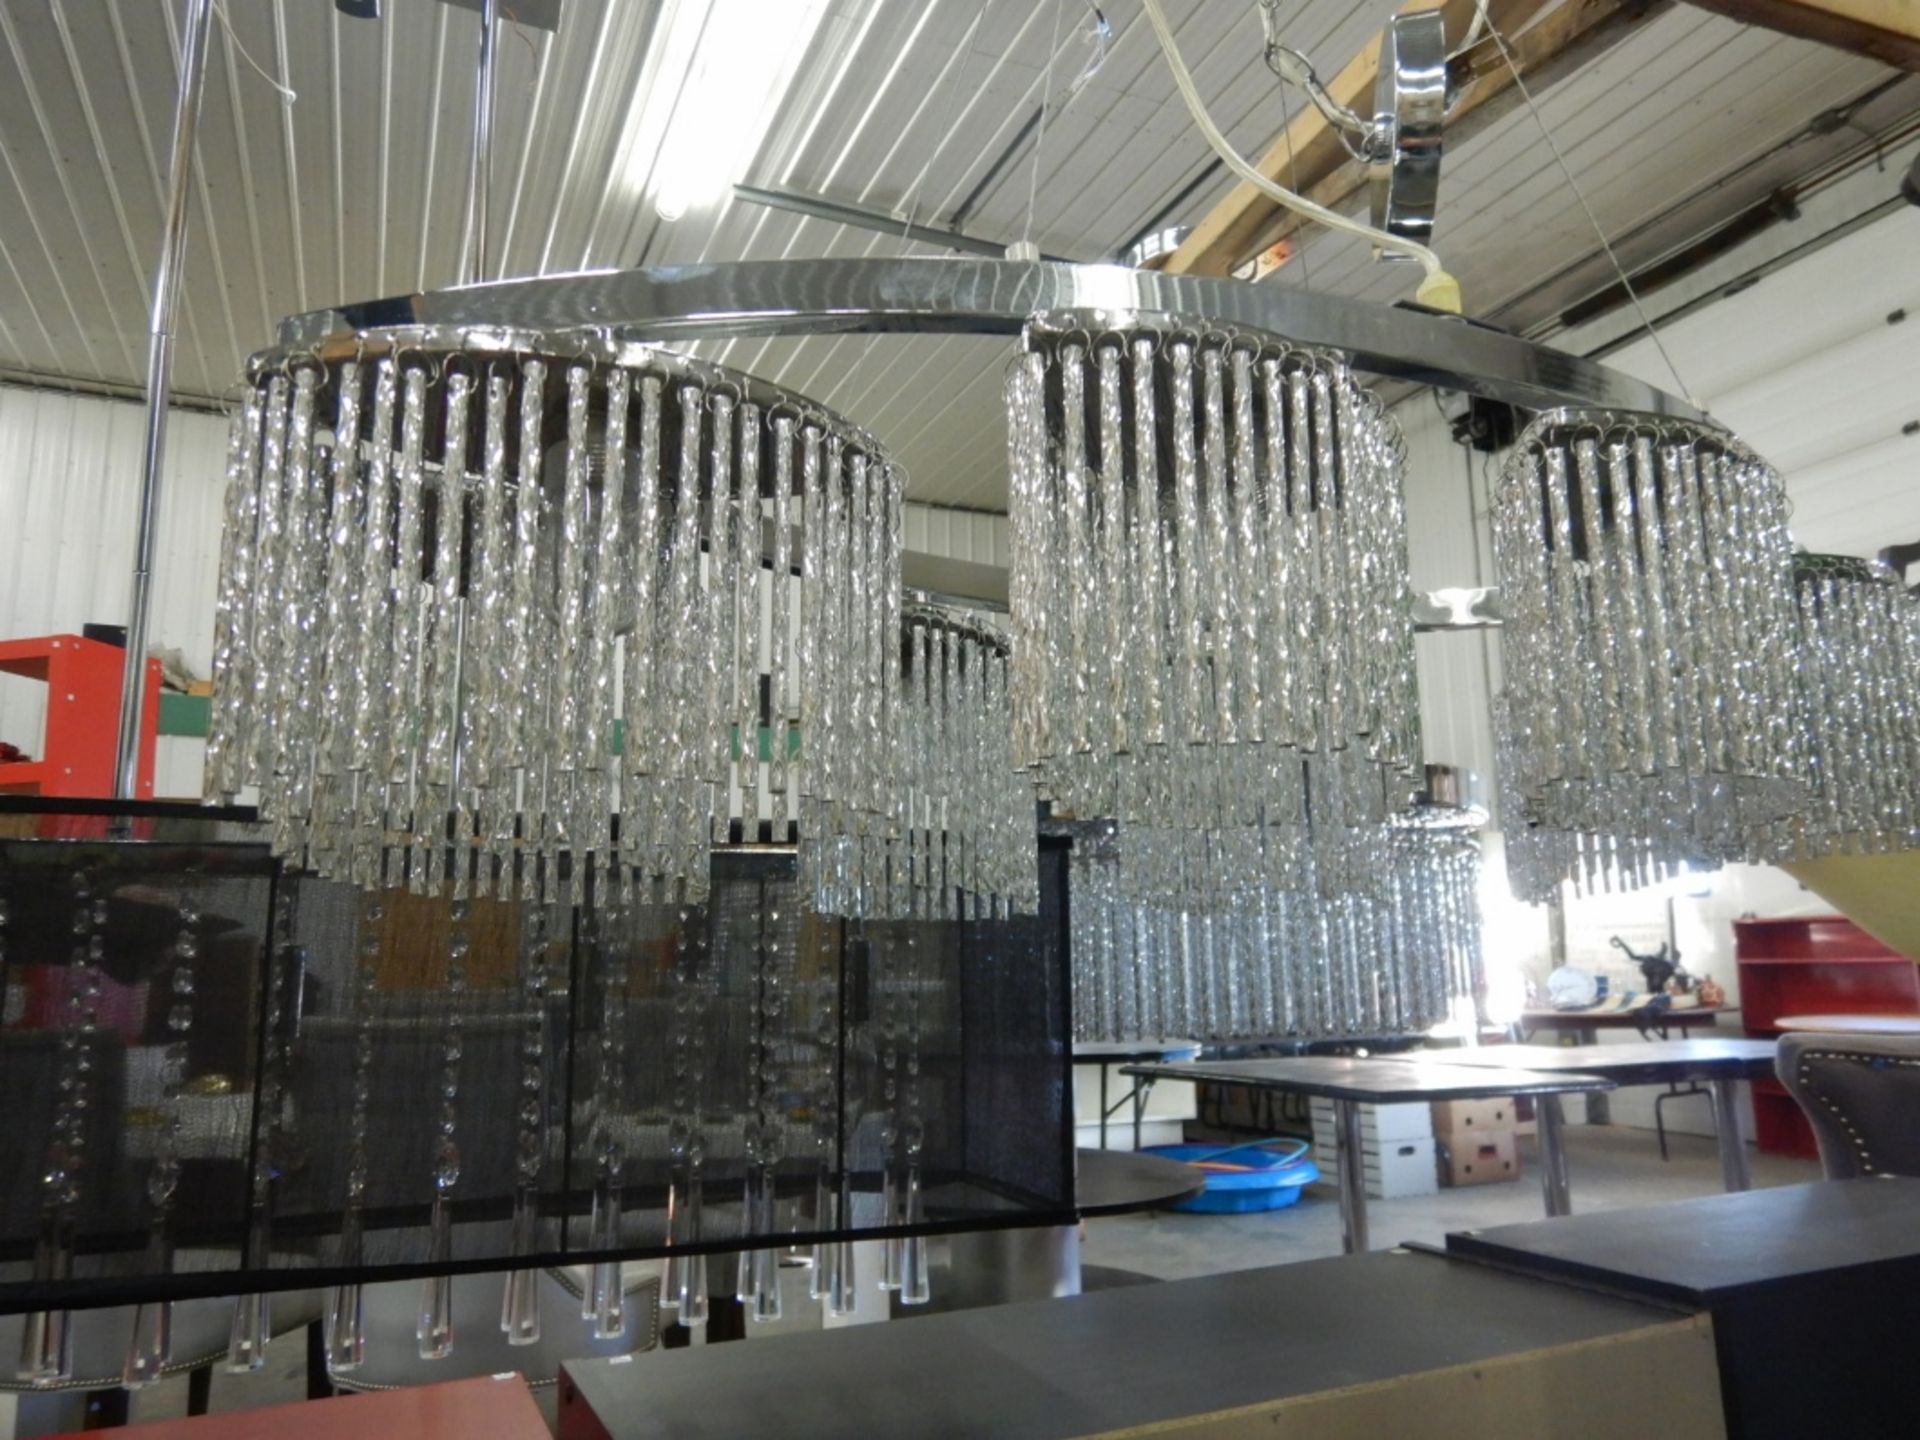 LIGHT FIXTURE CEILING MOUNTED OVAL W/ 4 1/2" "BLING" STRAWS - POLISHED CHROME - Image 3 of 3